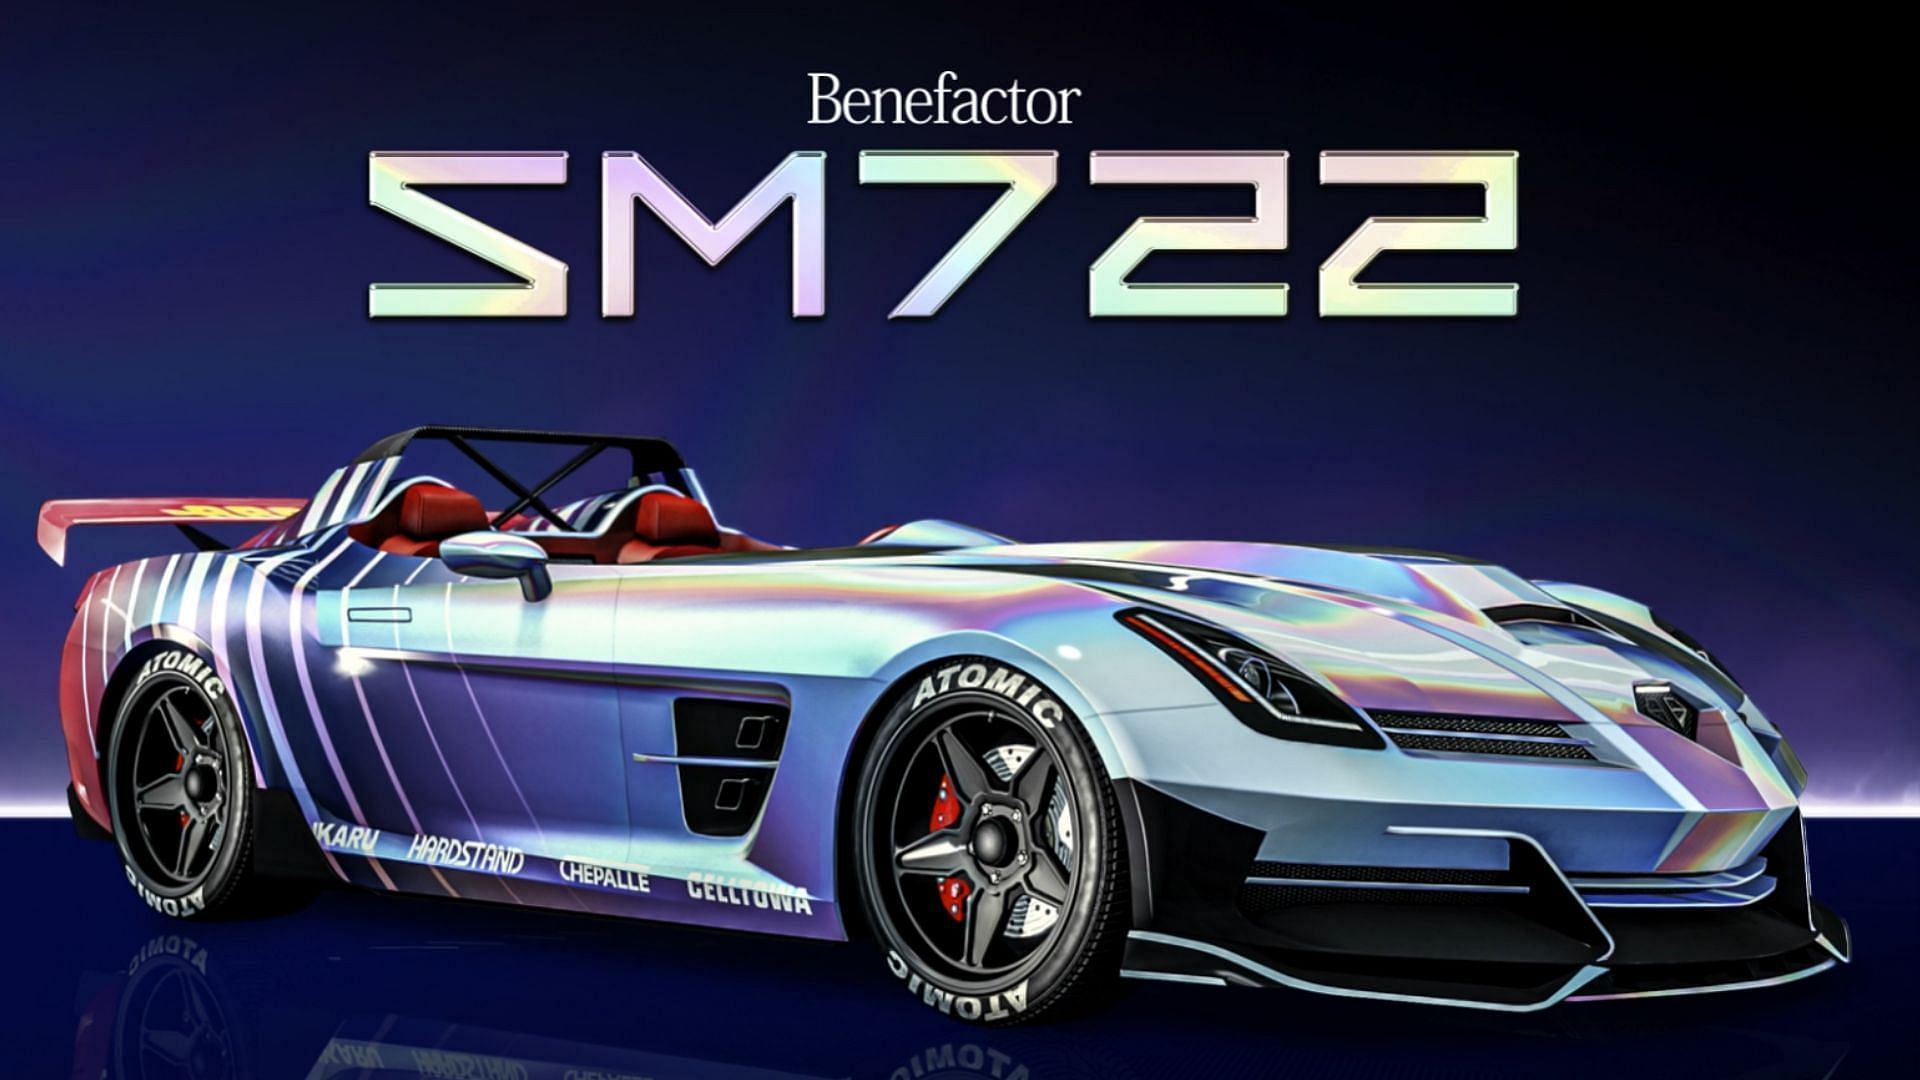 The SM722 was released on August 4, 2022 (Image via Rockstar Games)